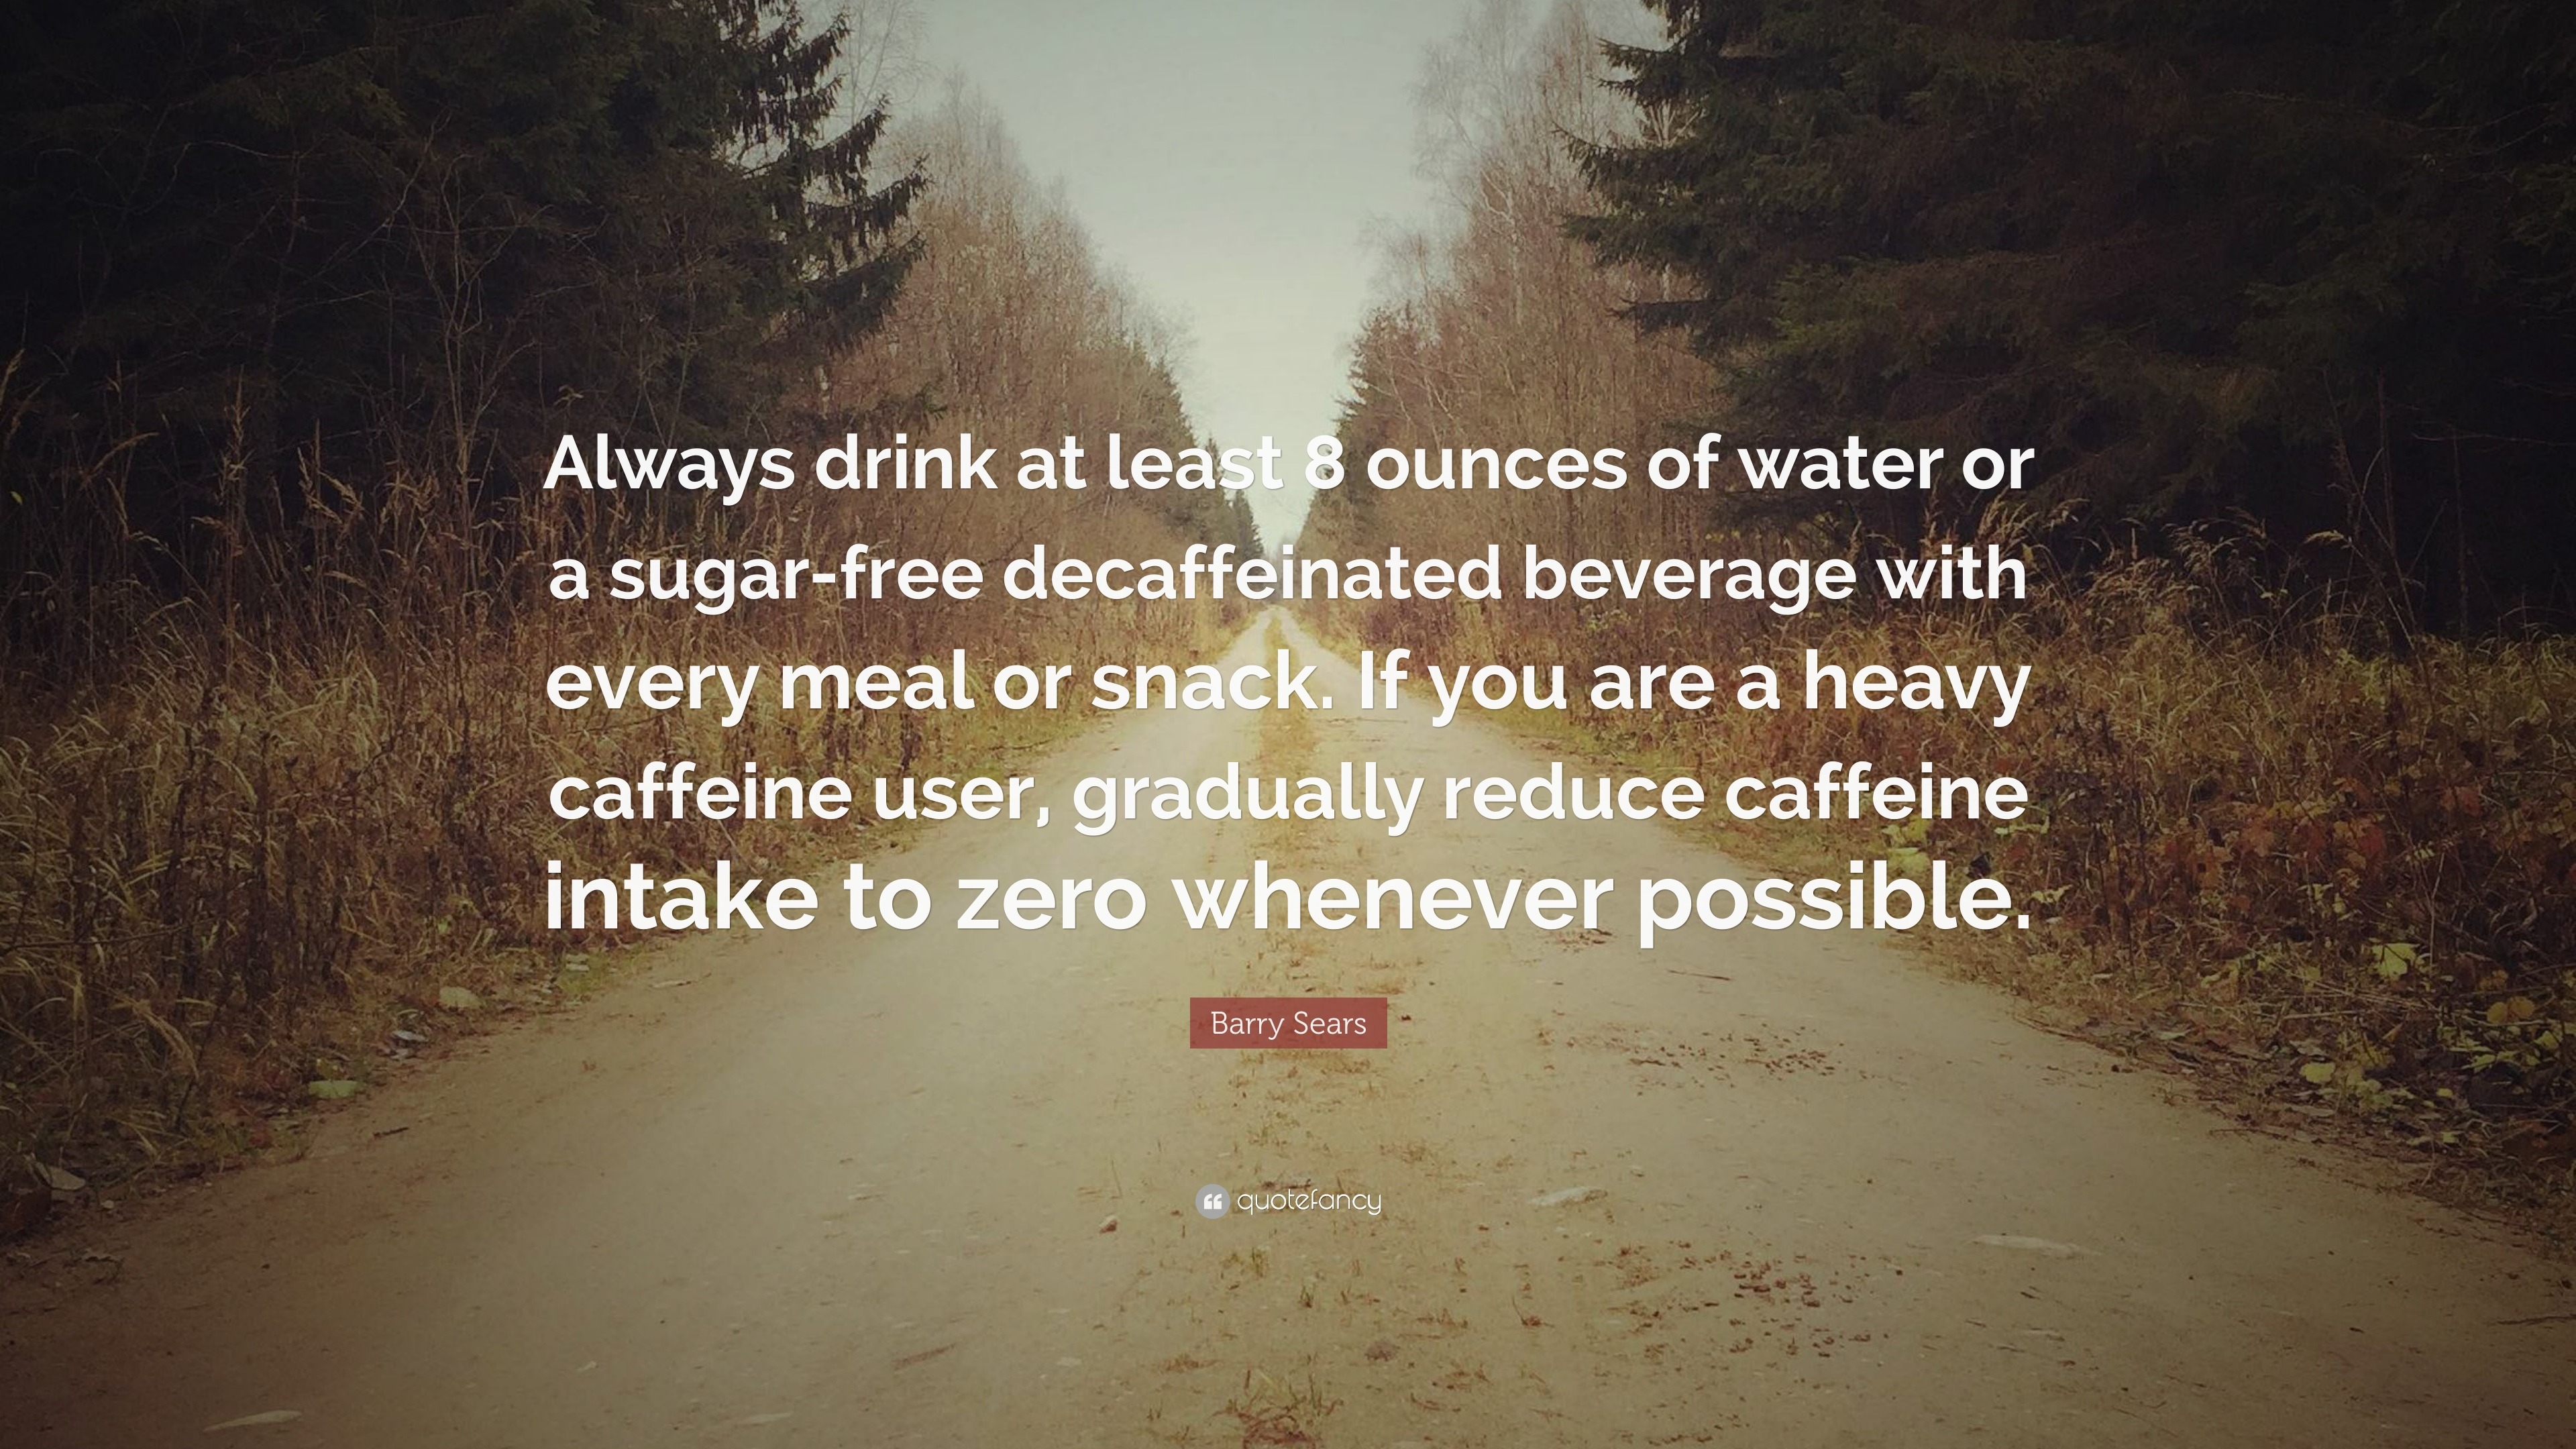 https://quotefancy.com/media/wallpaper/3840x2160/1686892-Barry-Sears-Quote-Always-drink-at-least-8-ounces-of-water-or-a.jpg